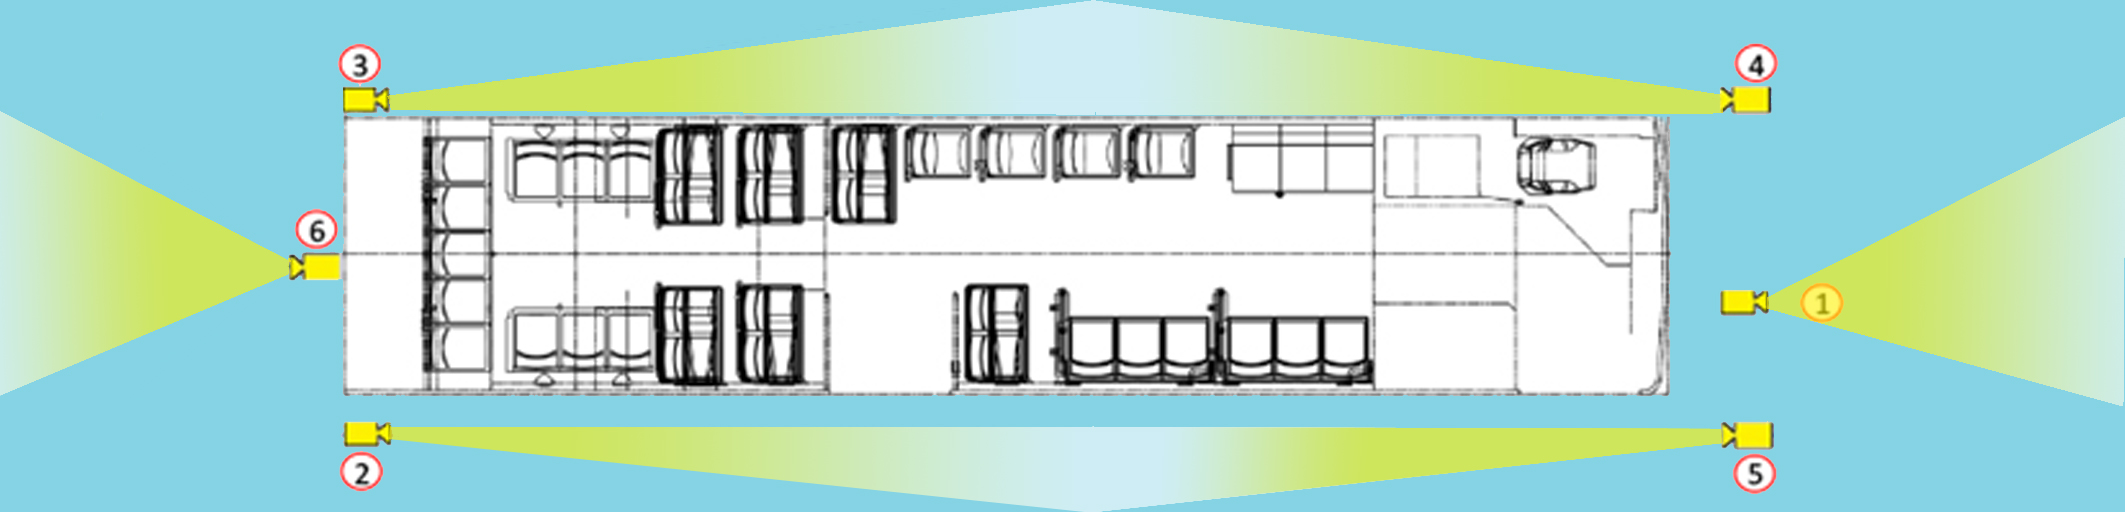 Diagram for proposed six external camera locations on TTC bus